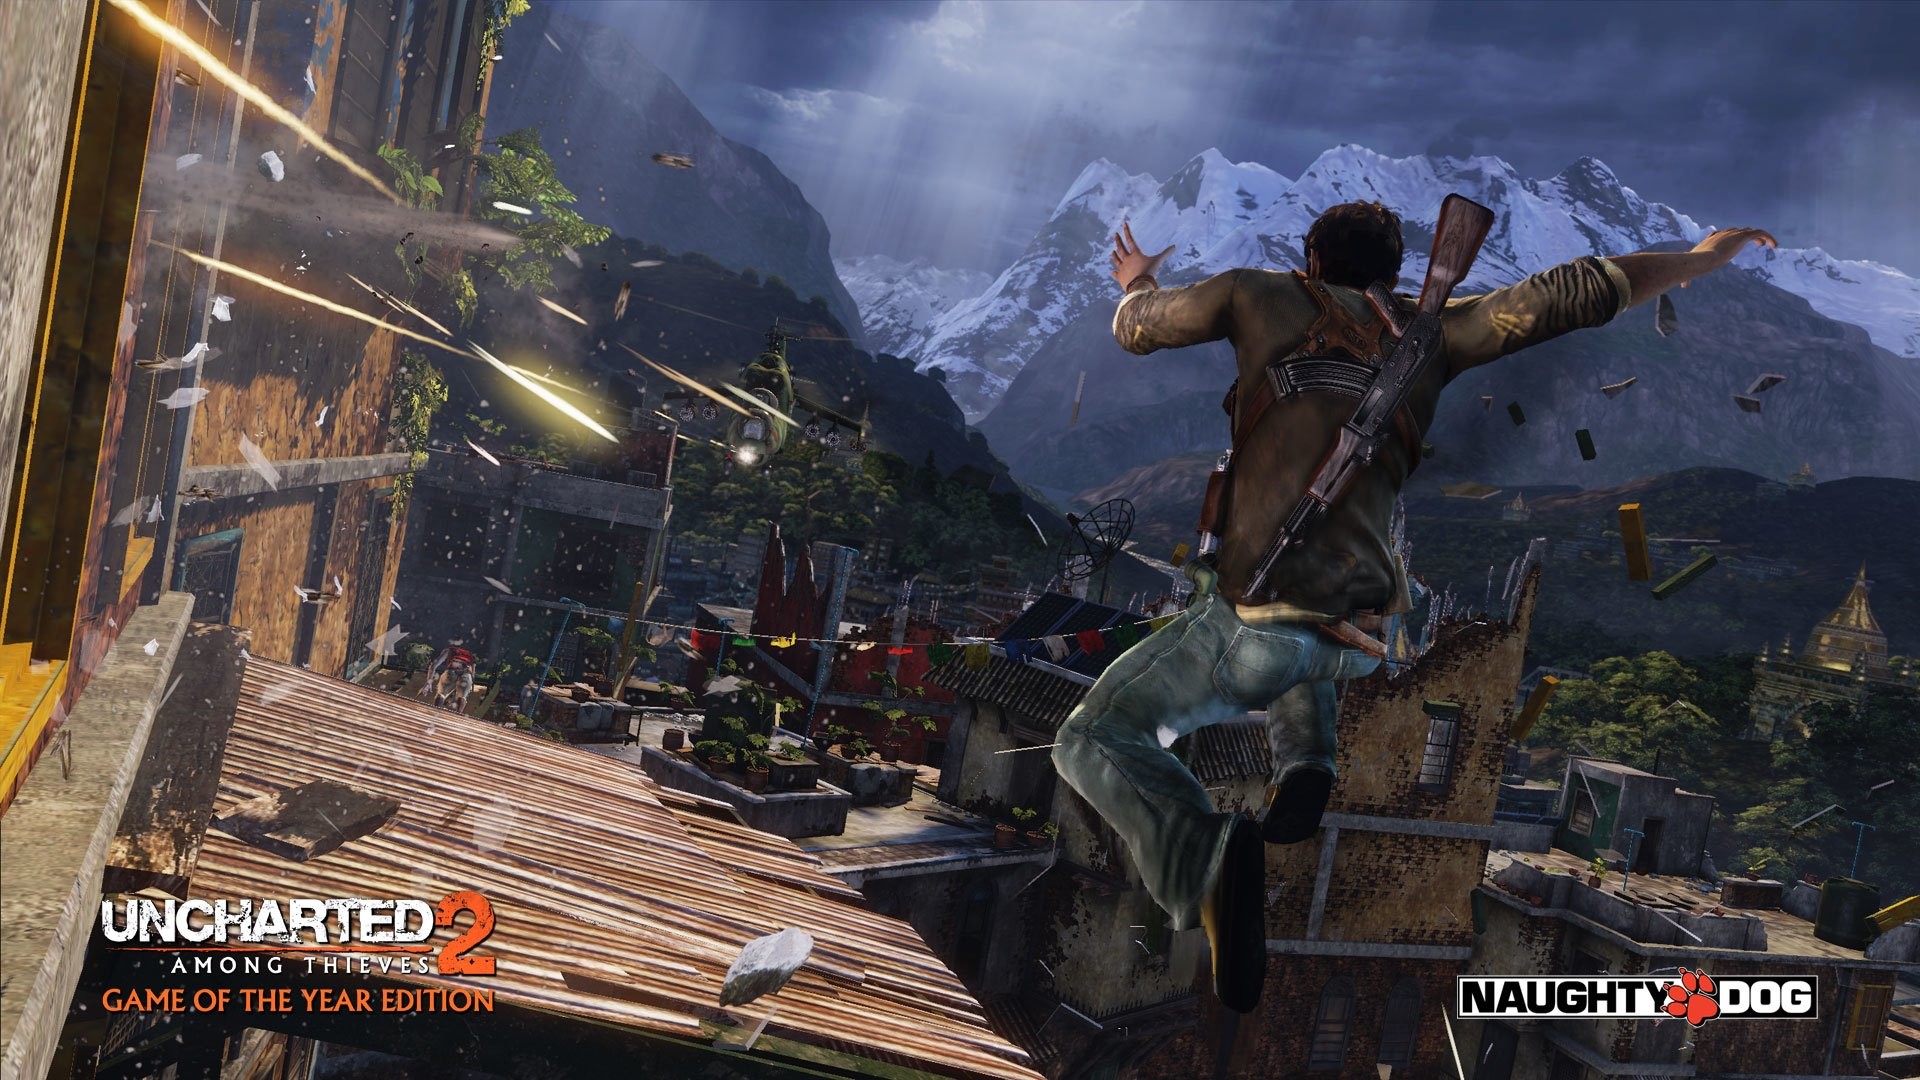 1920x1080 Video Game - Uncharted 2: Among Thieves Wallpaper